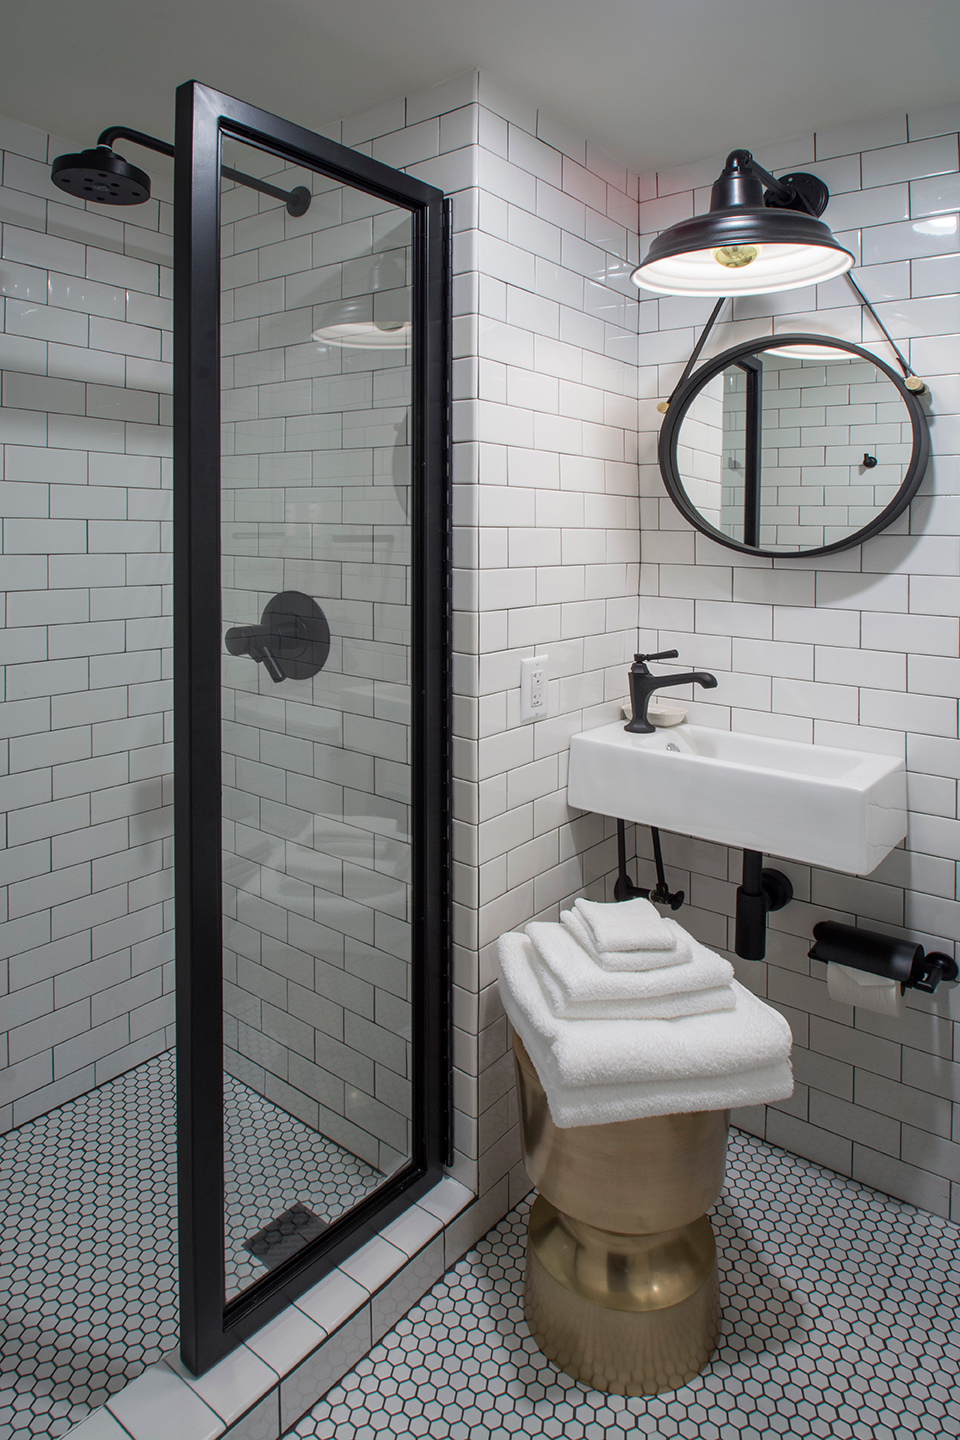 Bath at Seattle's Hotel Theodore - opening fall 2016.